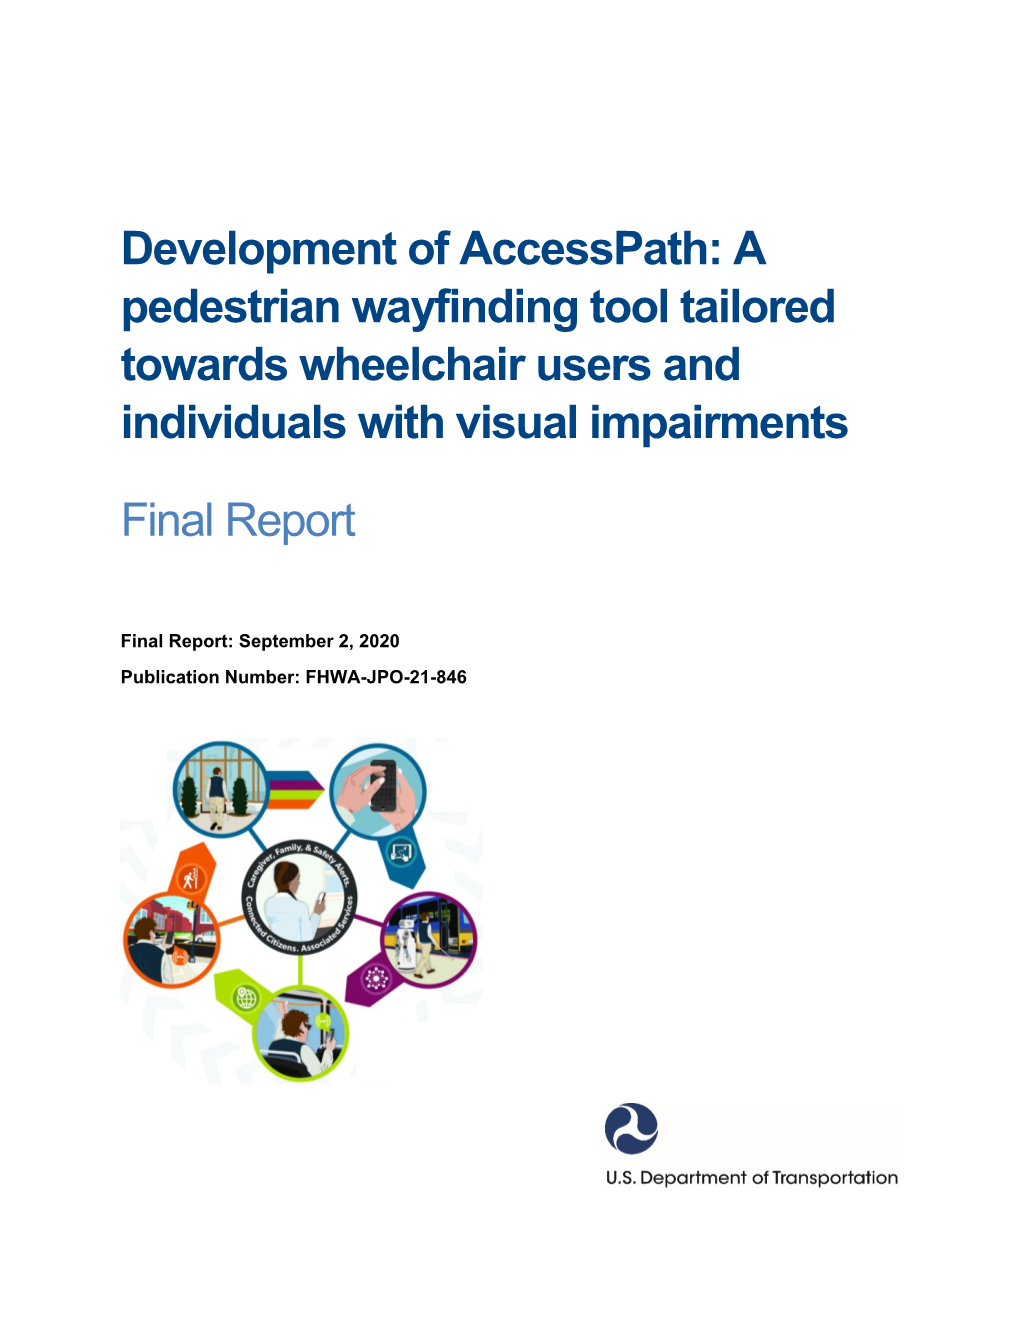 Development of Accesspath: a Pedestrian Wayfinding Tool Tailored Towards Wheelchair Users and Individuals with Visual Impairments